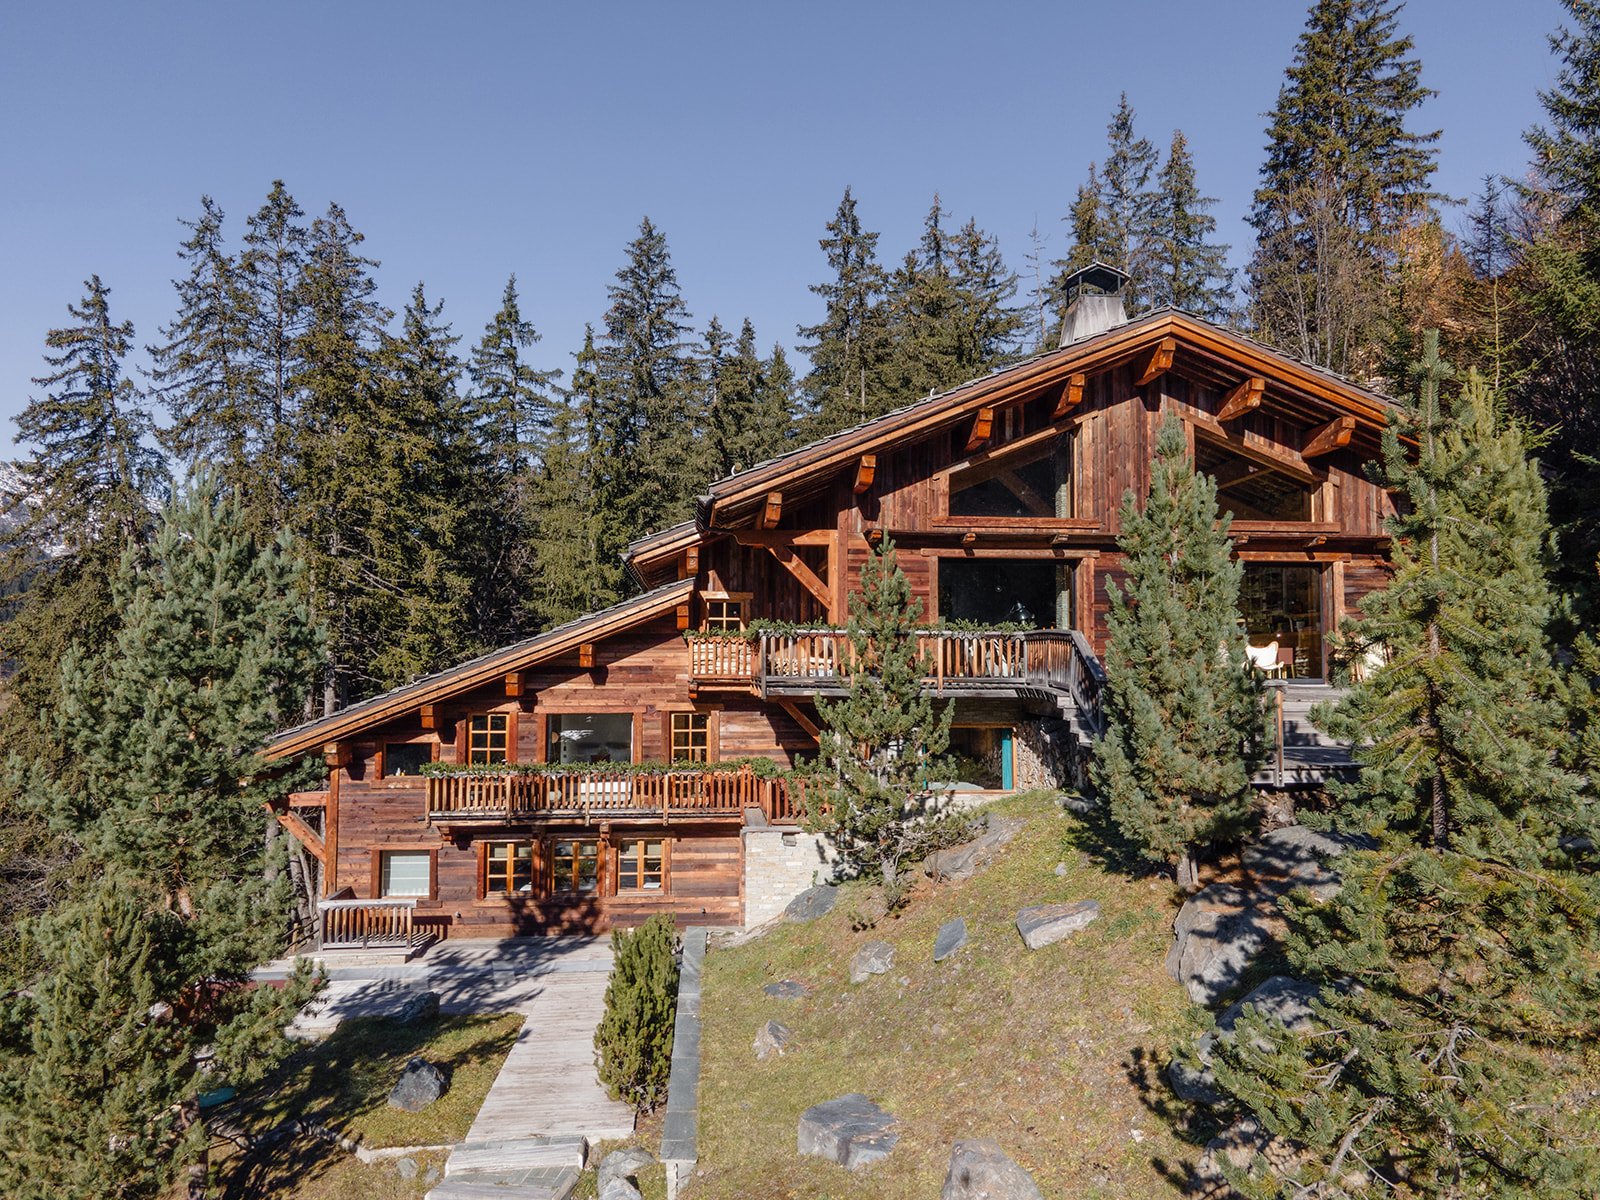 Prestigious chalet in Méribel at the foot of the slopes with hotel and spa services